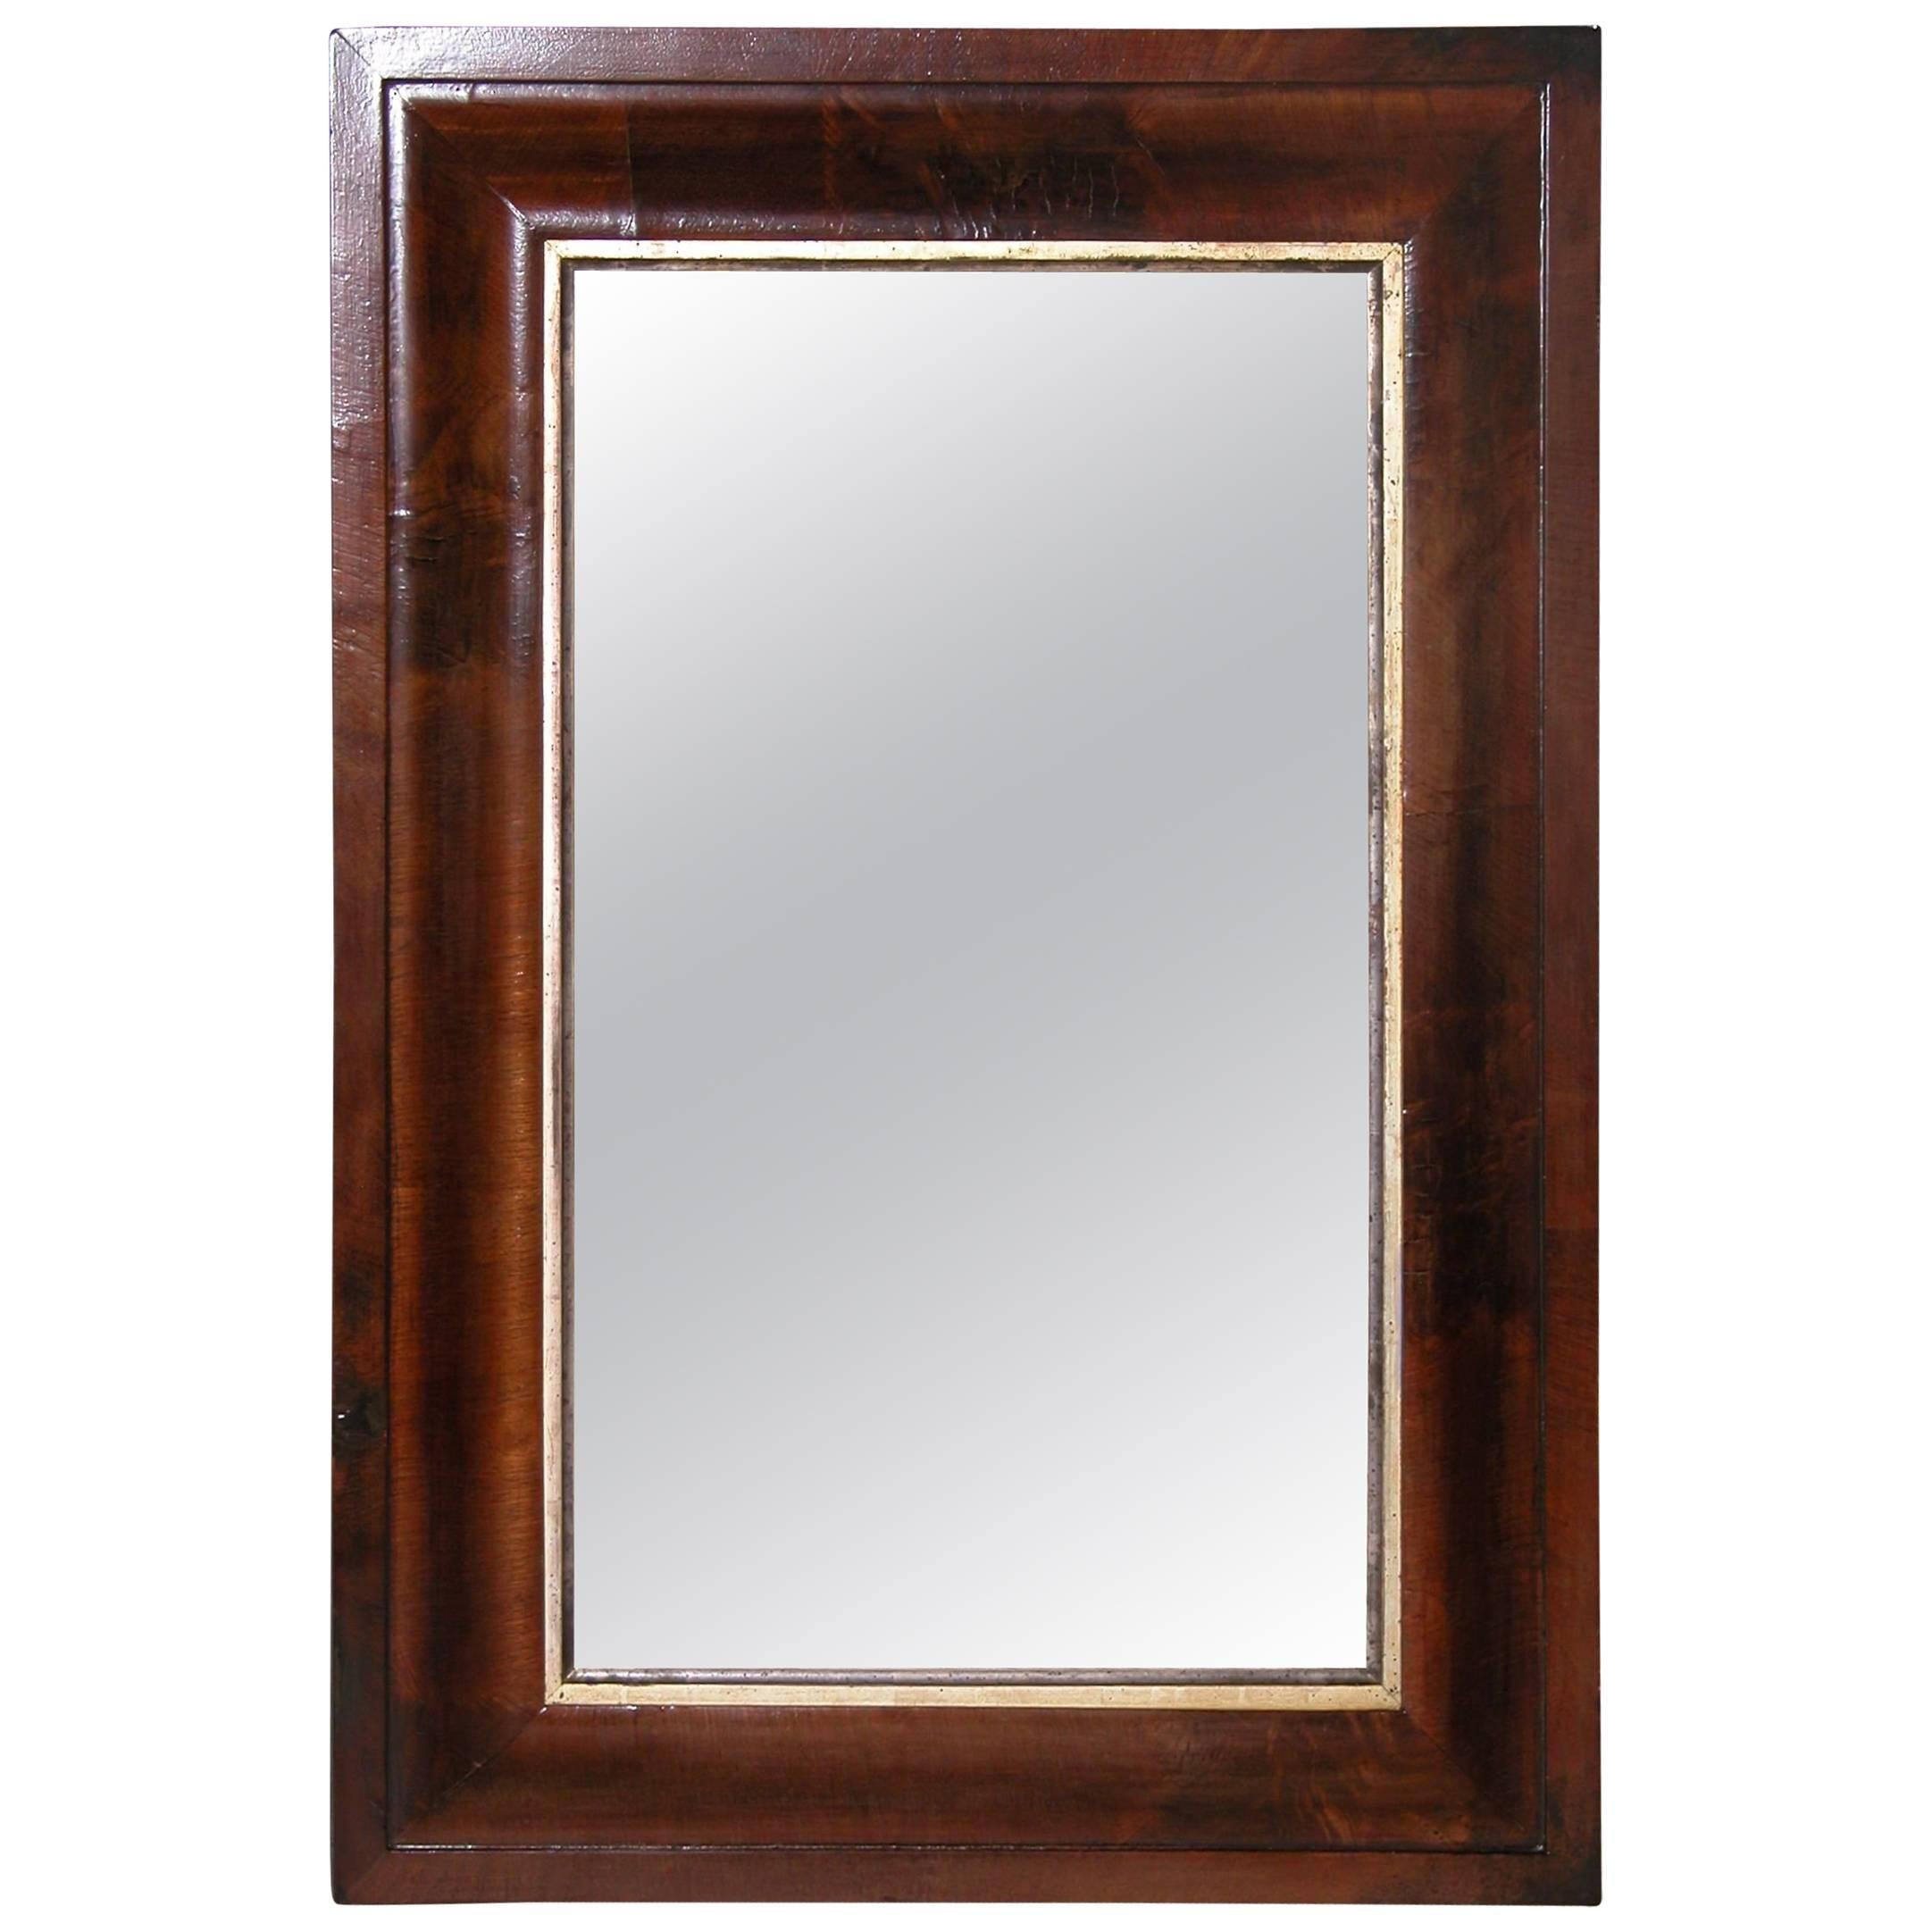 Mahogany Rectangular Wall Hung Mirror with Gold Leaf Inner Band